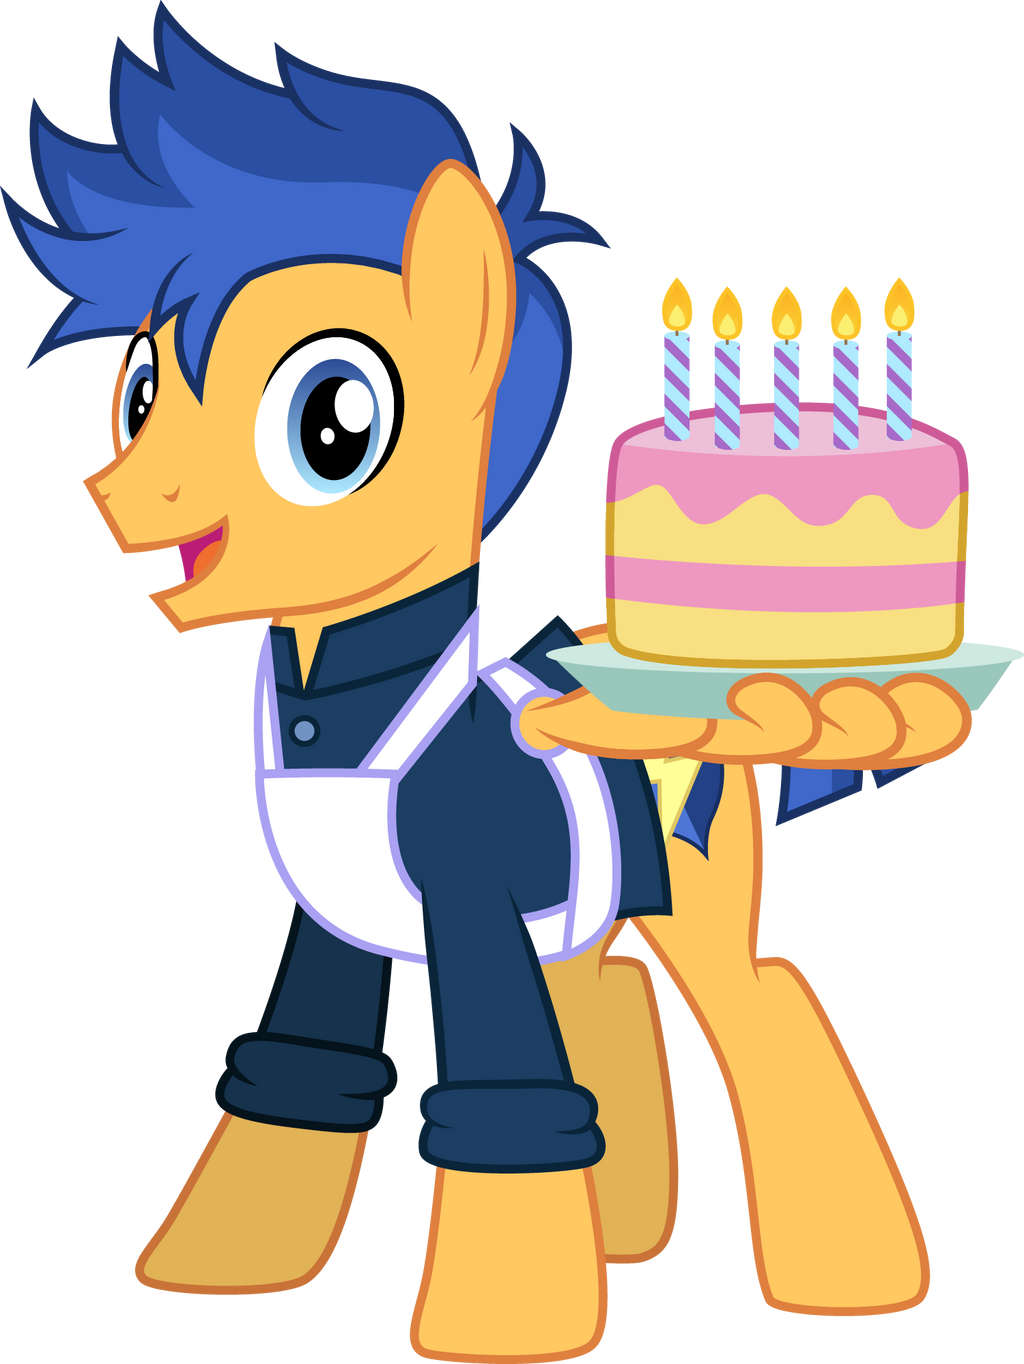 Happy Birthday from Flash Sentry by CloudyGlow on DeviantArt